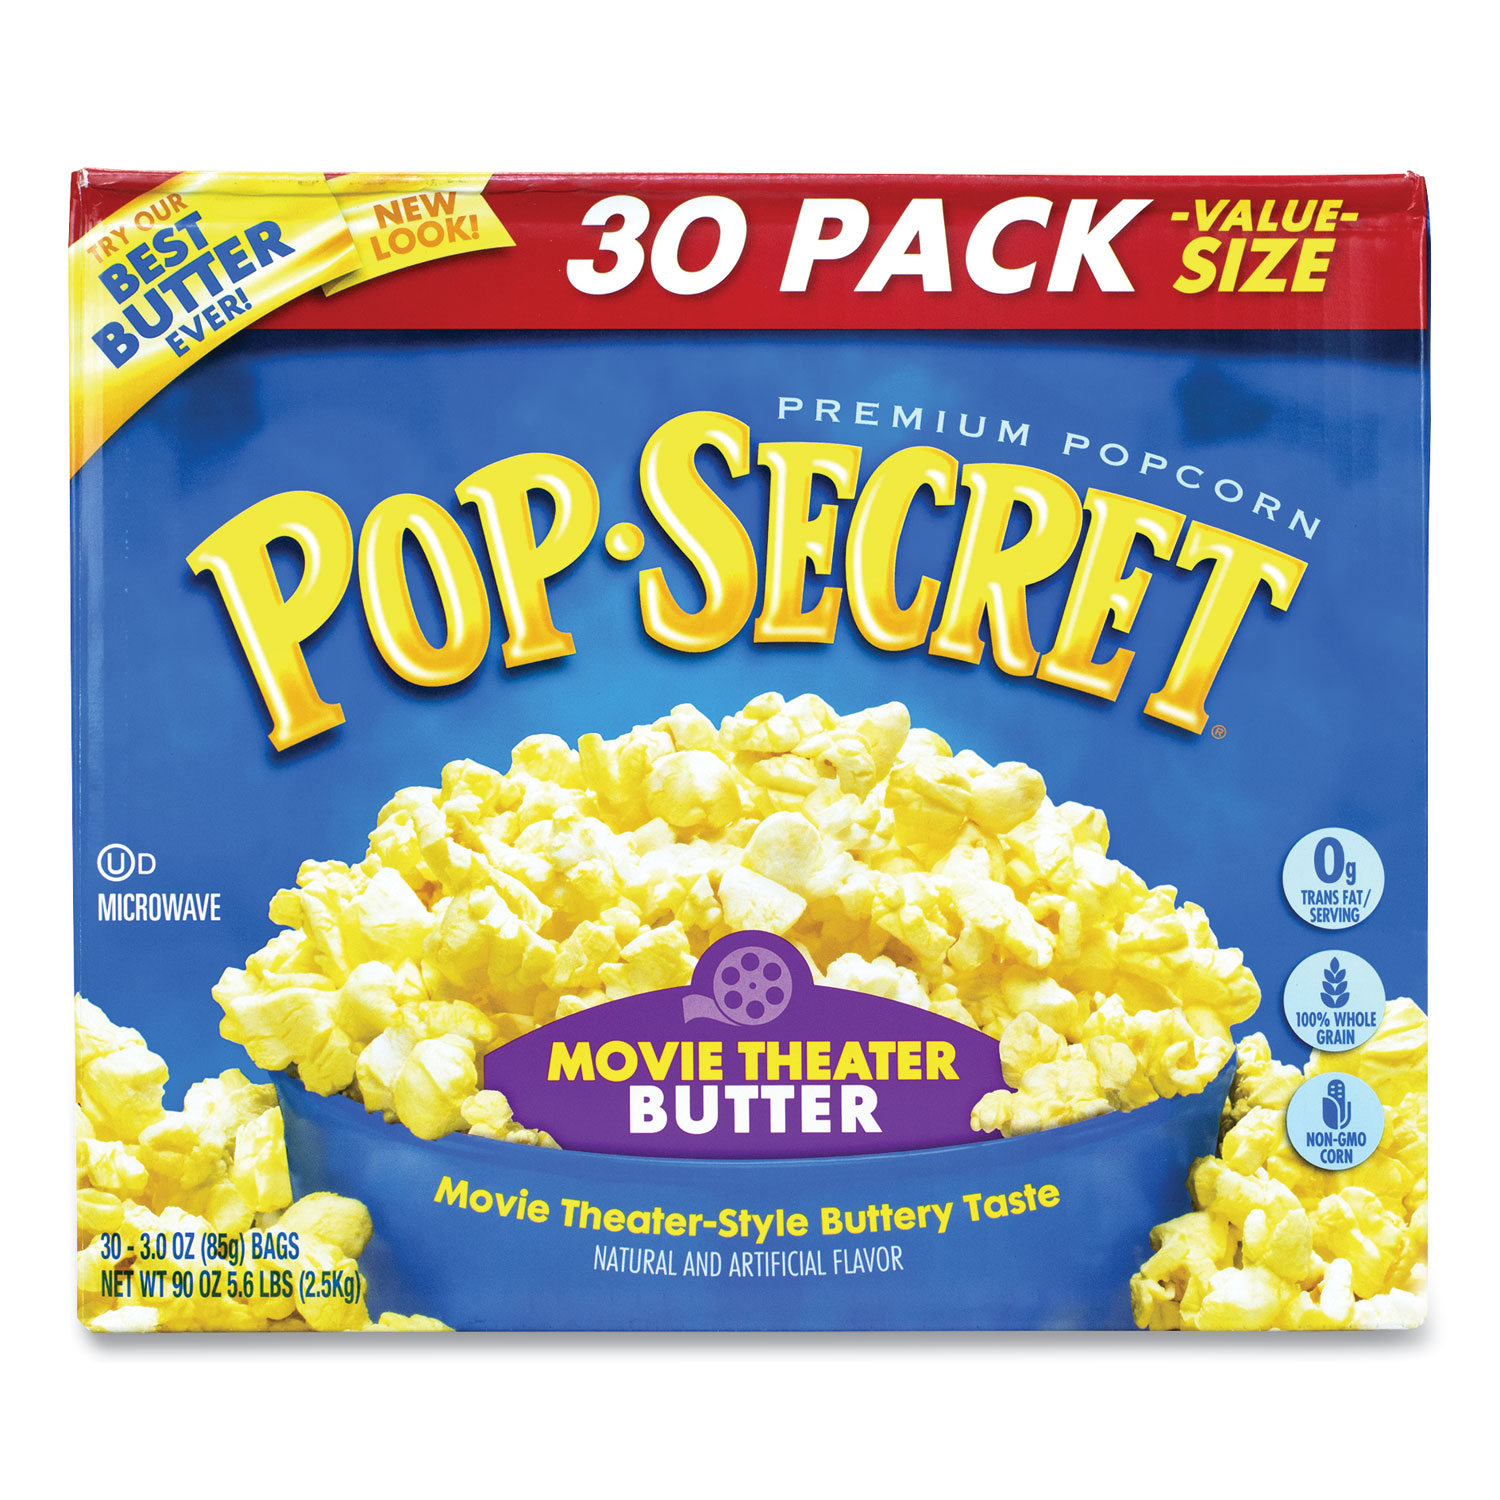 Pop Secret® Microwave Popcorn, Movie Theater Butter, 3 oz Bags, 30/Carton, Free Delivery in 1-4 Business Days